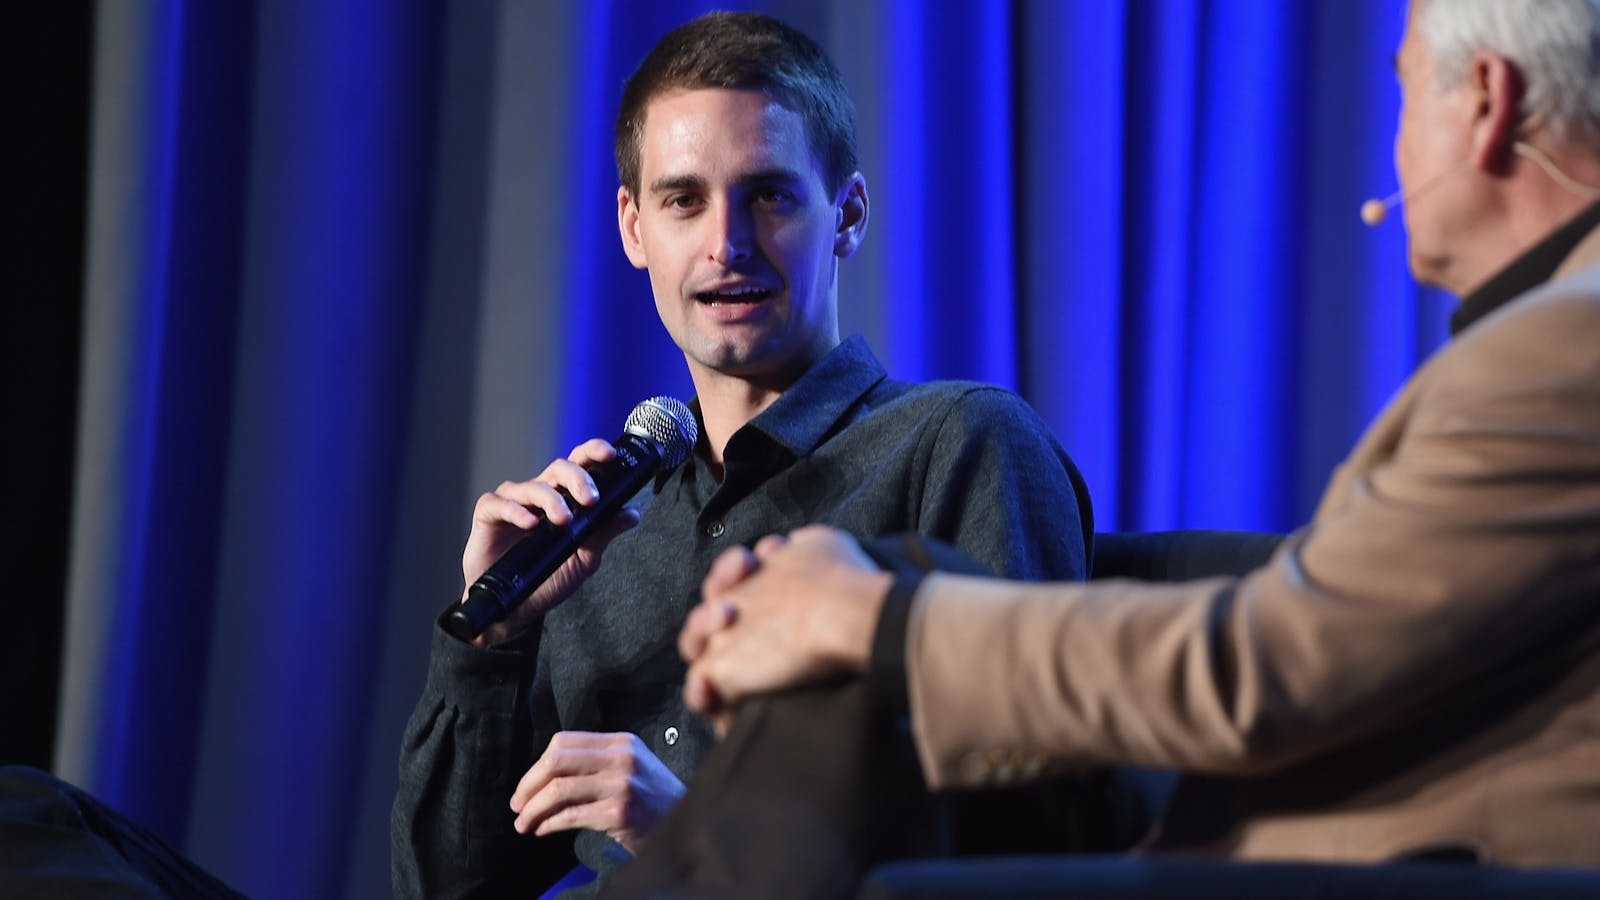 Snap CEO Evan Spiegel. Photo by Larry Busacca/Getty Images.